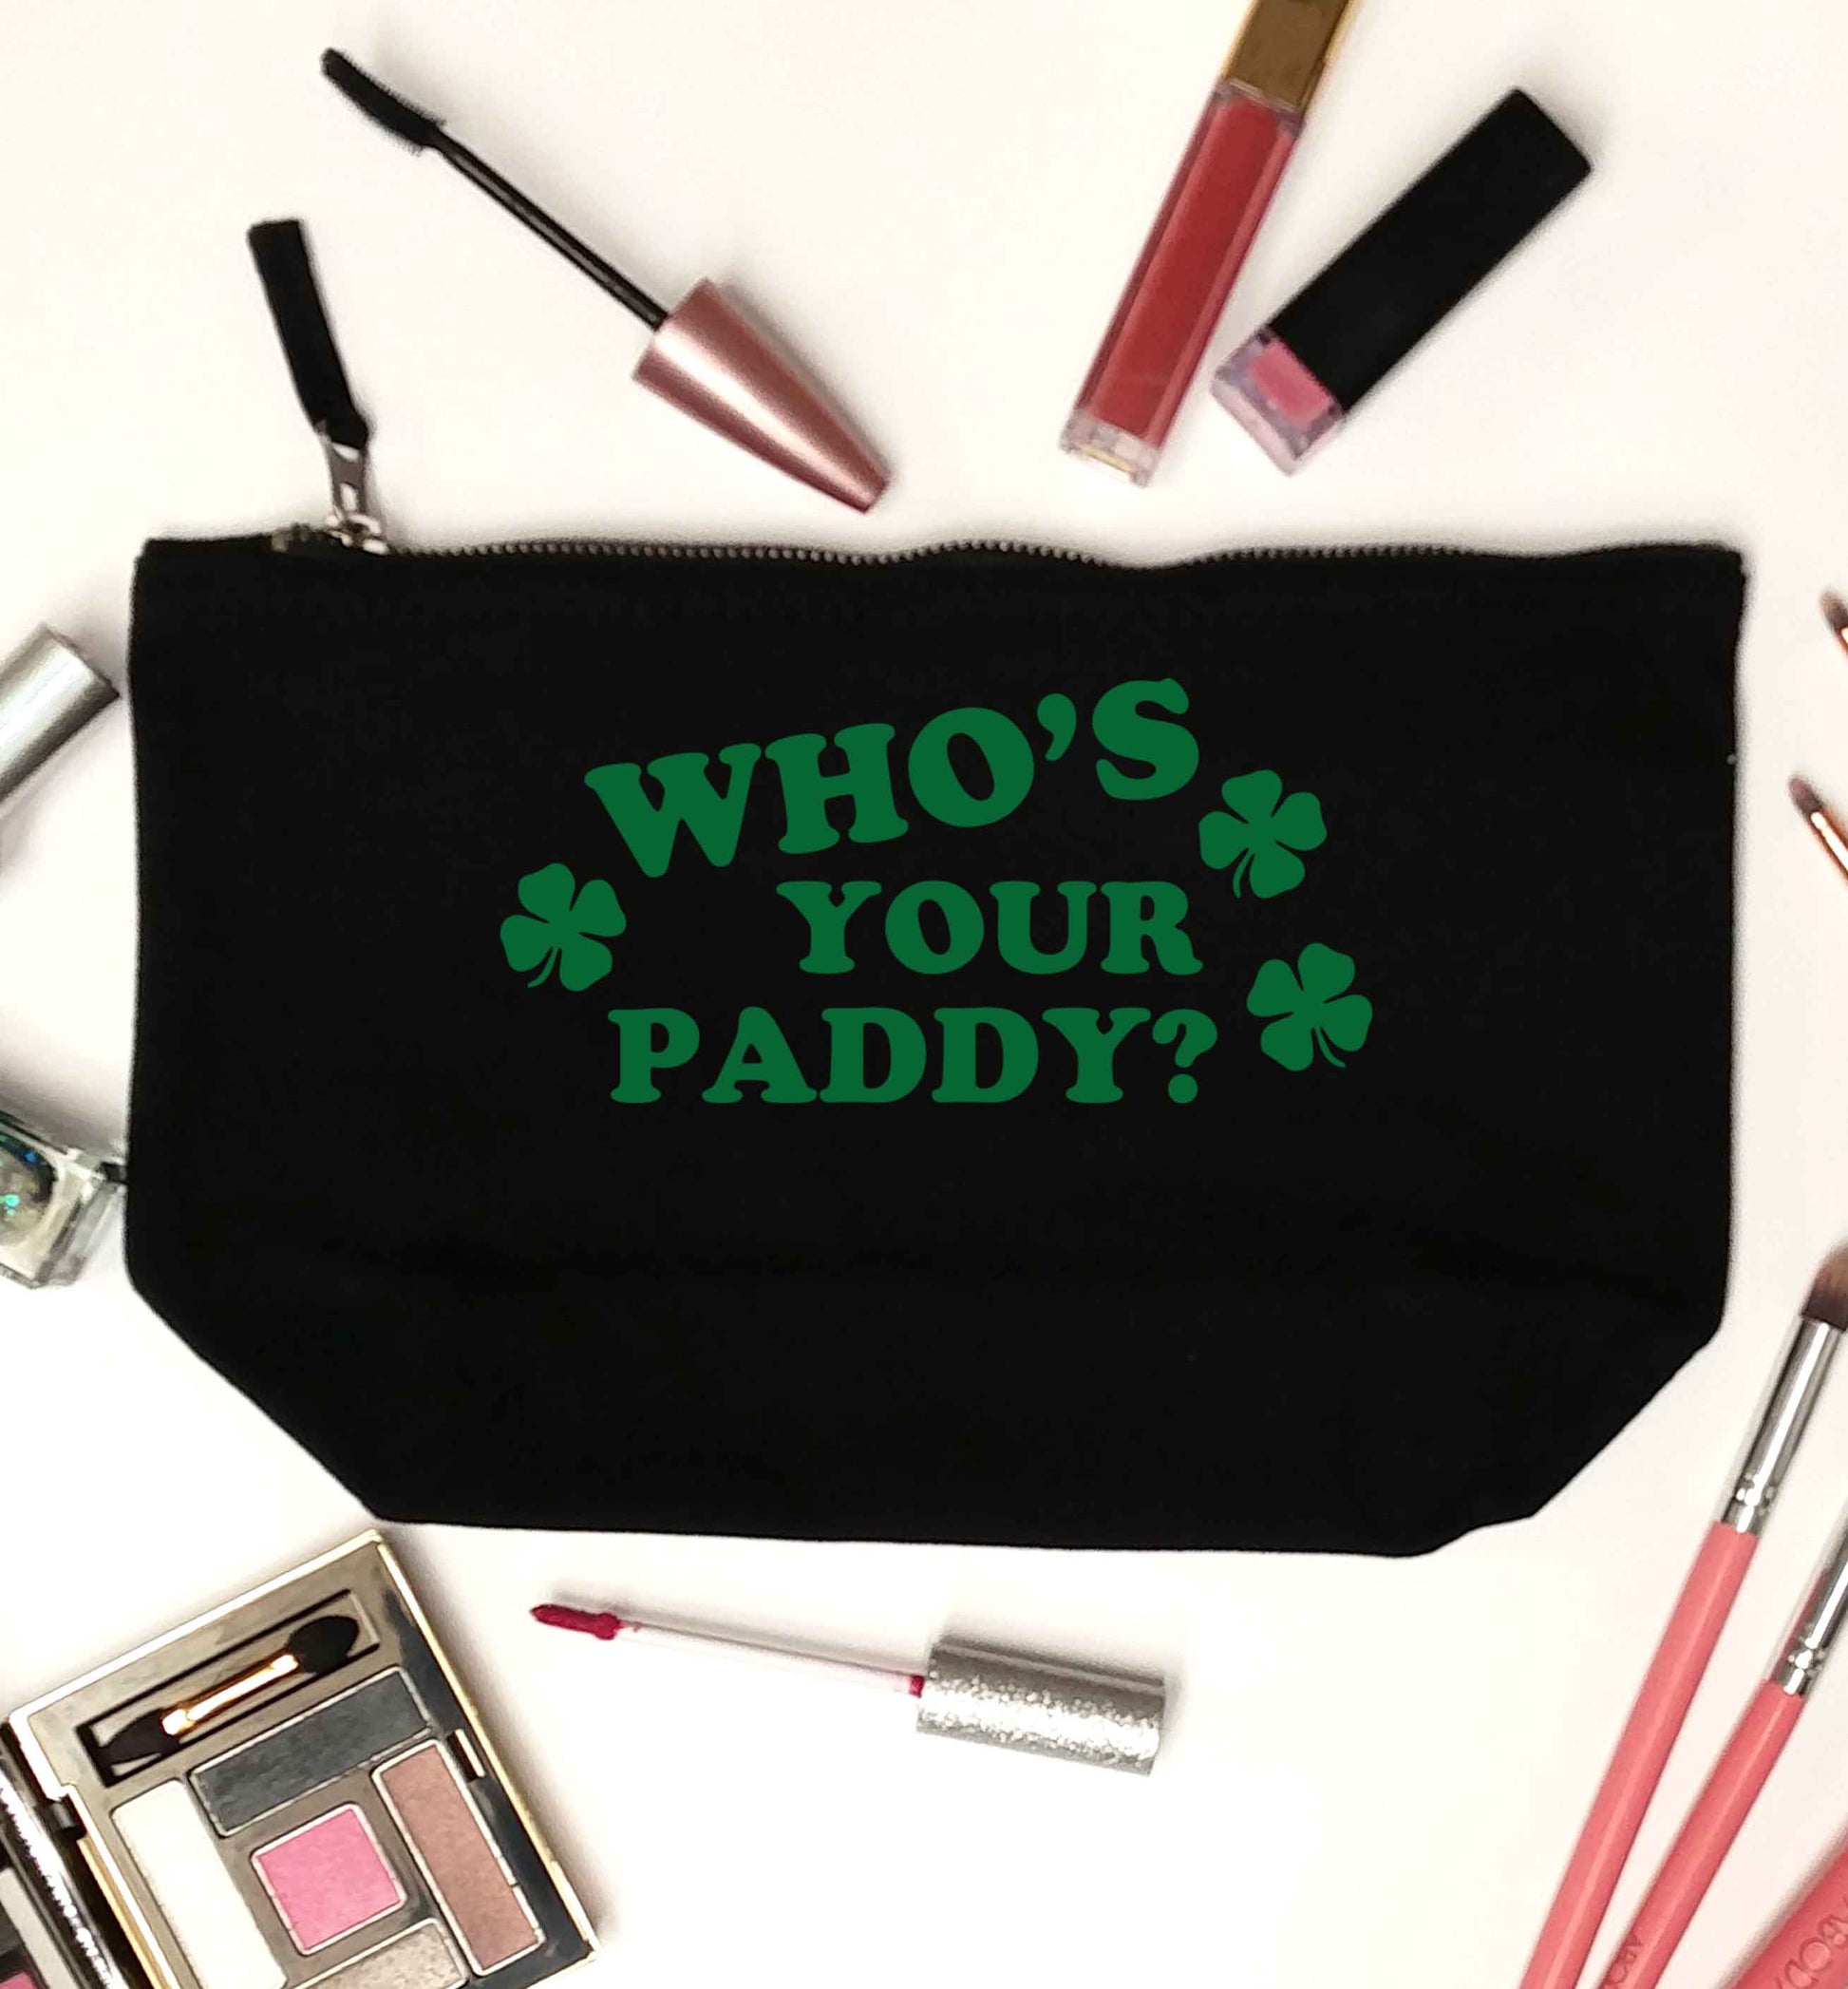 Who's your paddy? black makeup bag